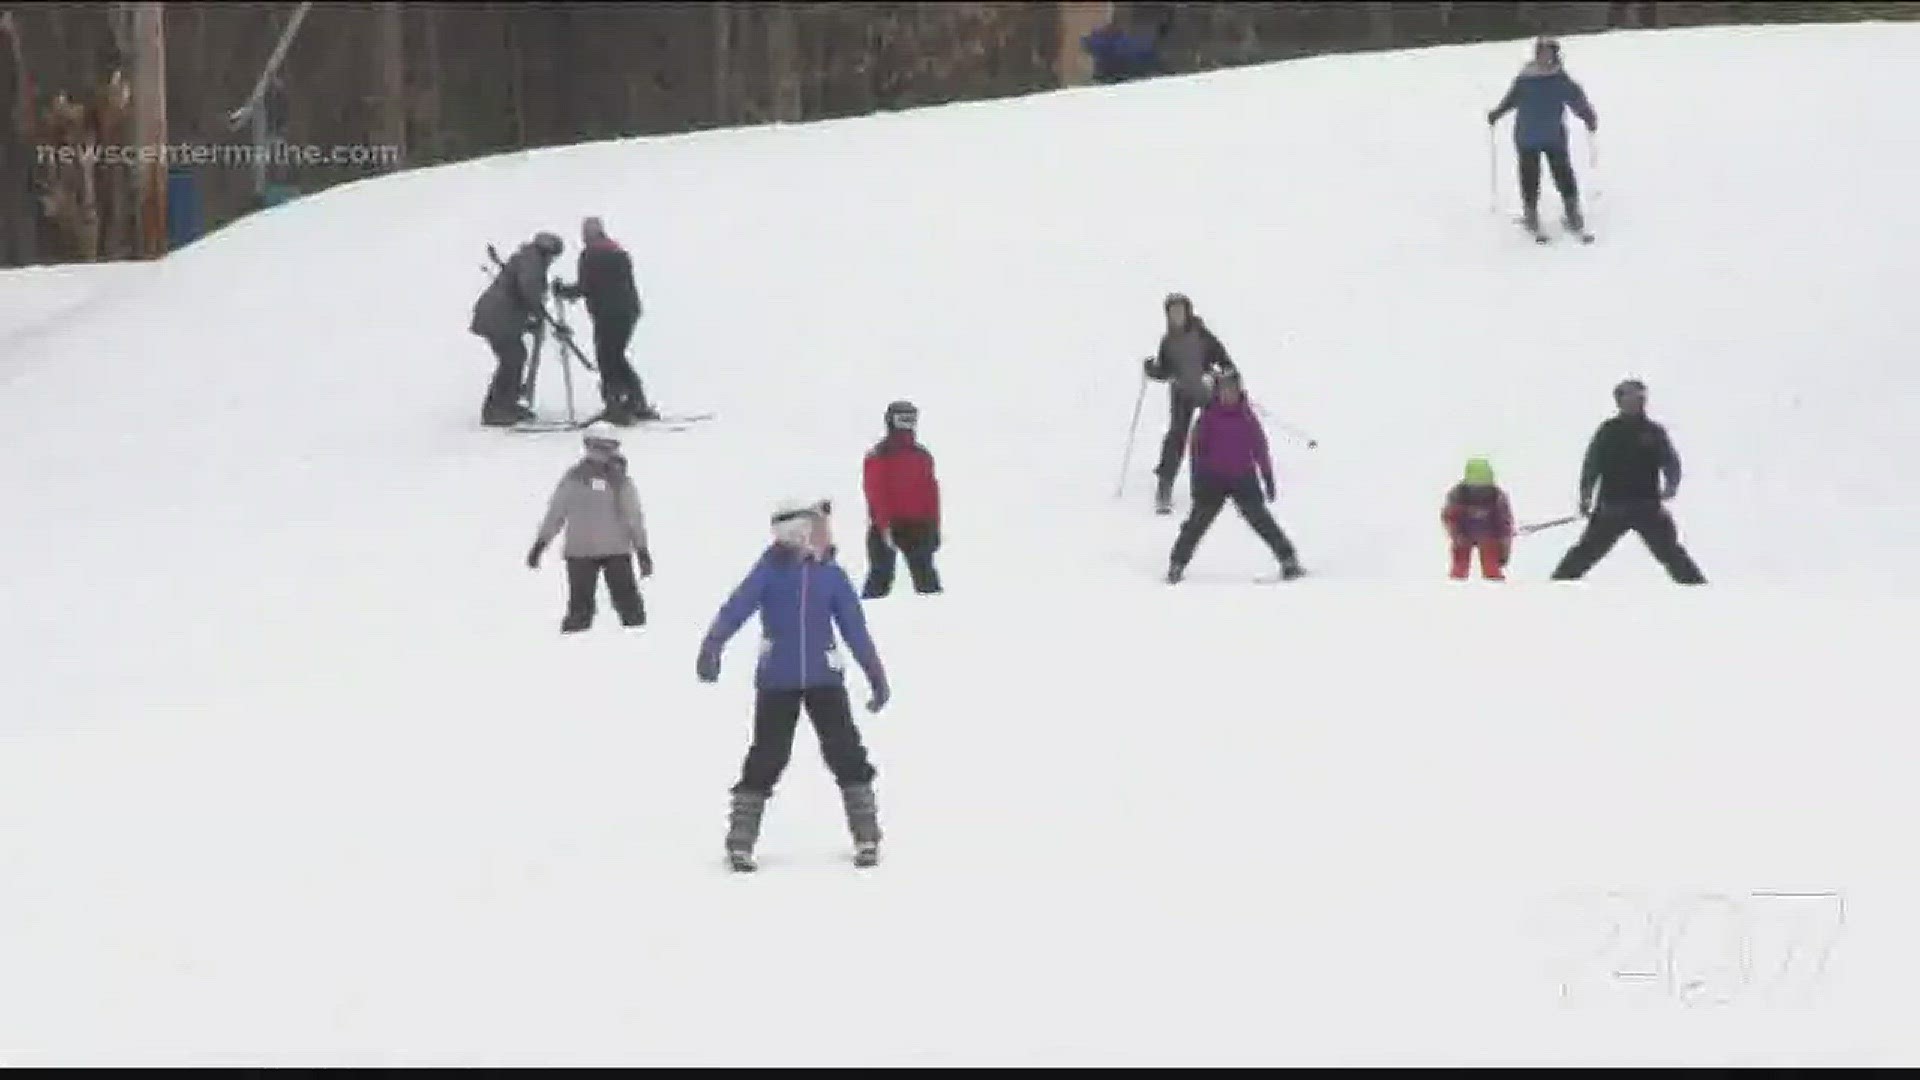 Cynthia's Challenge 24-hour ski-a-thon at King Pine Ski Area raises money for kids living with special needs.